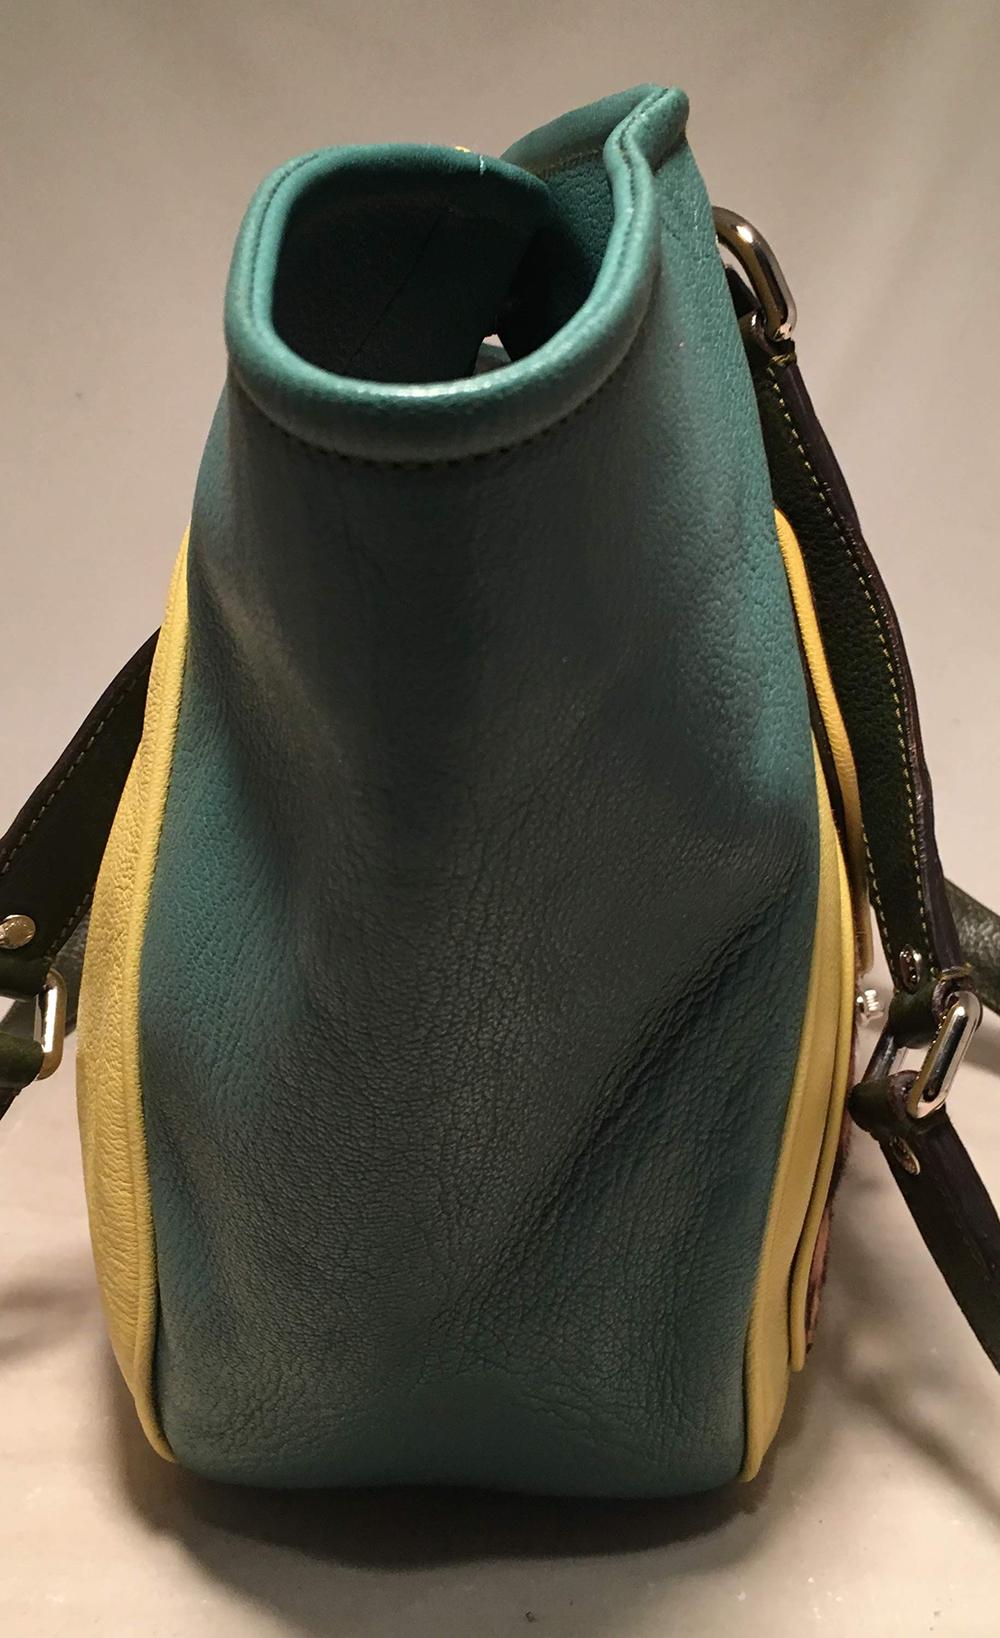 Dolce and Gabbana Green Color Block Miss Catch Large Lock Tote in very good condition. From the Miss Catch collection, this large lock tote style is perfect for a variety of occasions. Dark Jade green, yellow, and olive green leathers in a color